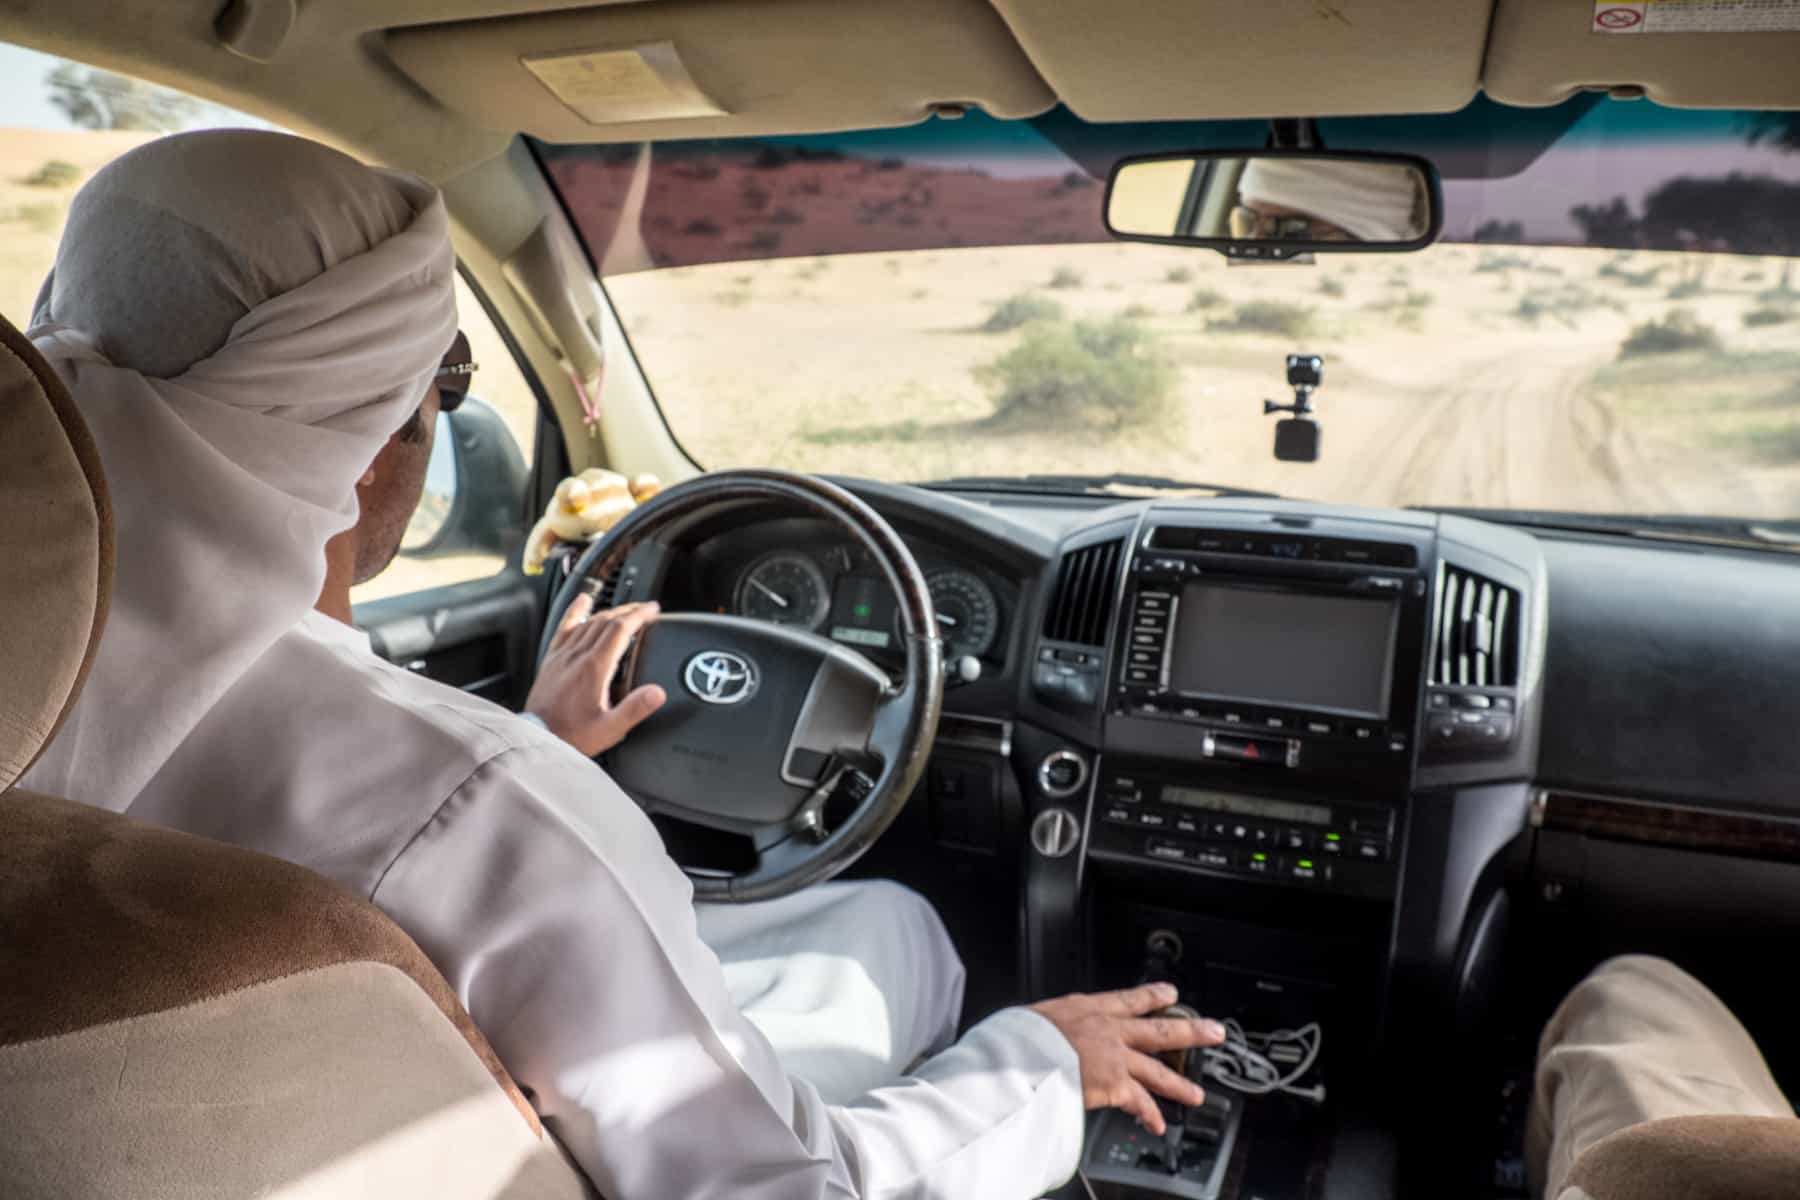 A man wearing a white robe and head scarf drives a beige and black car through a desert landscape